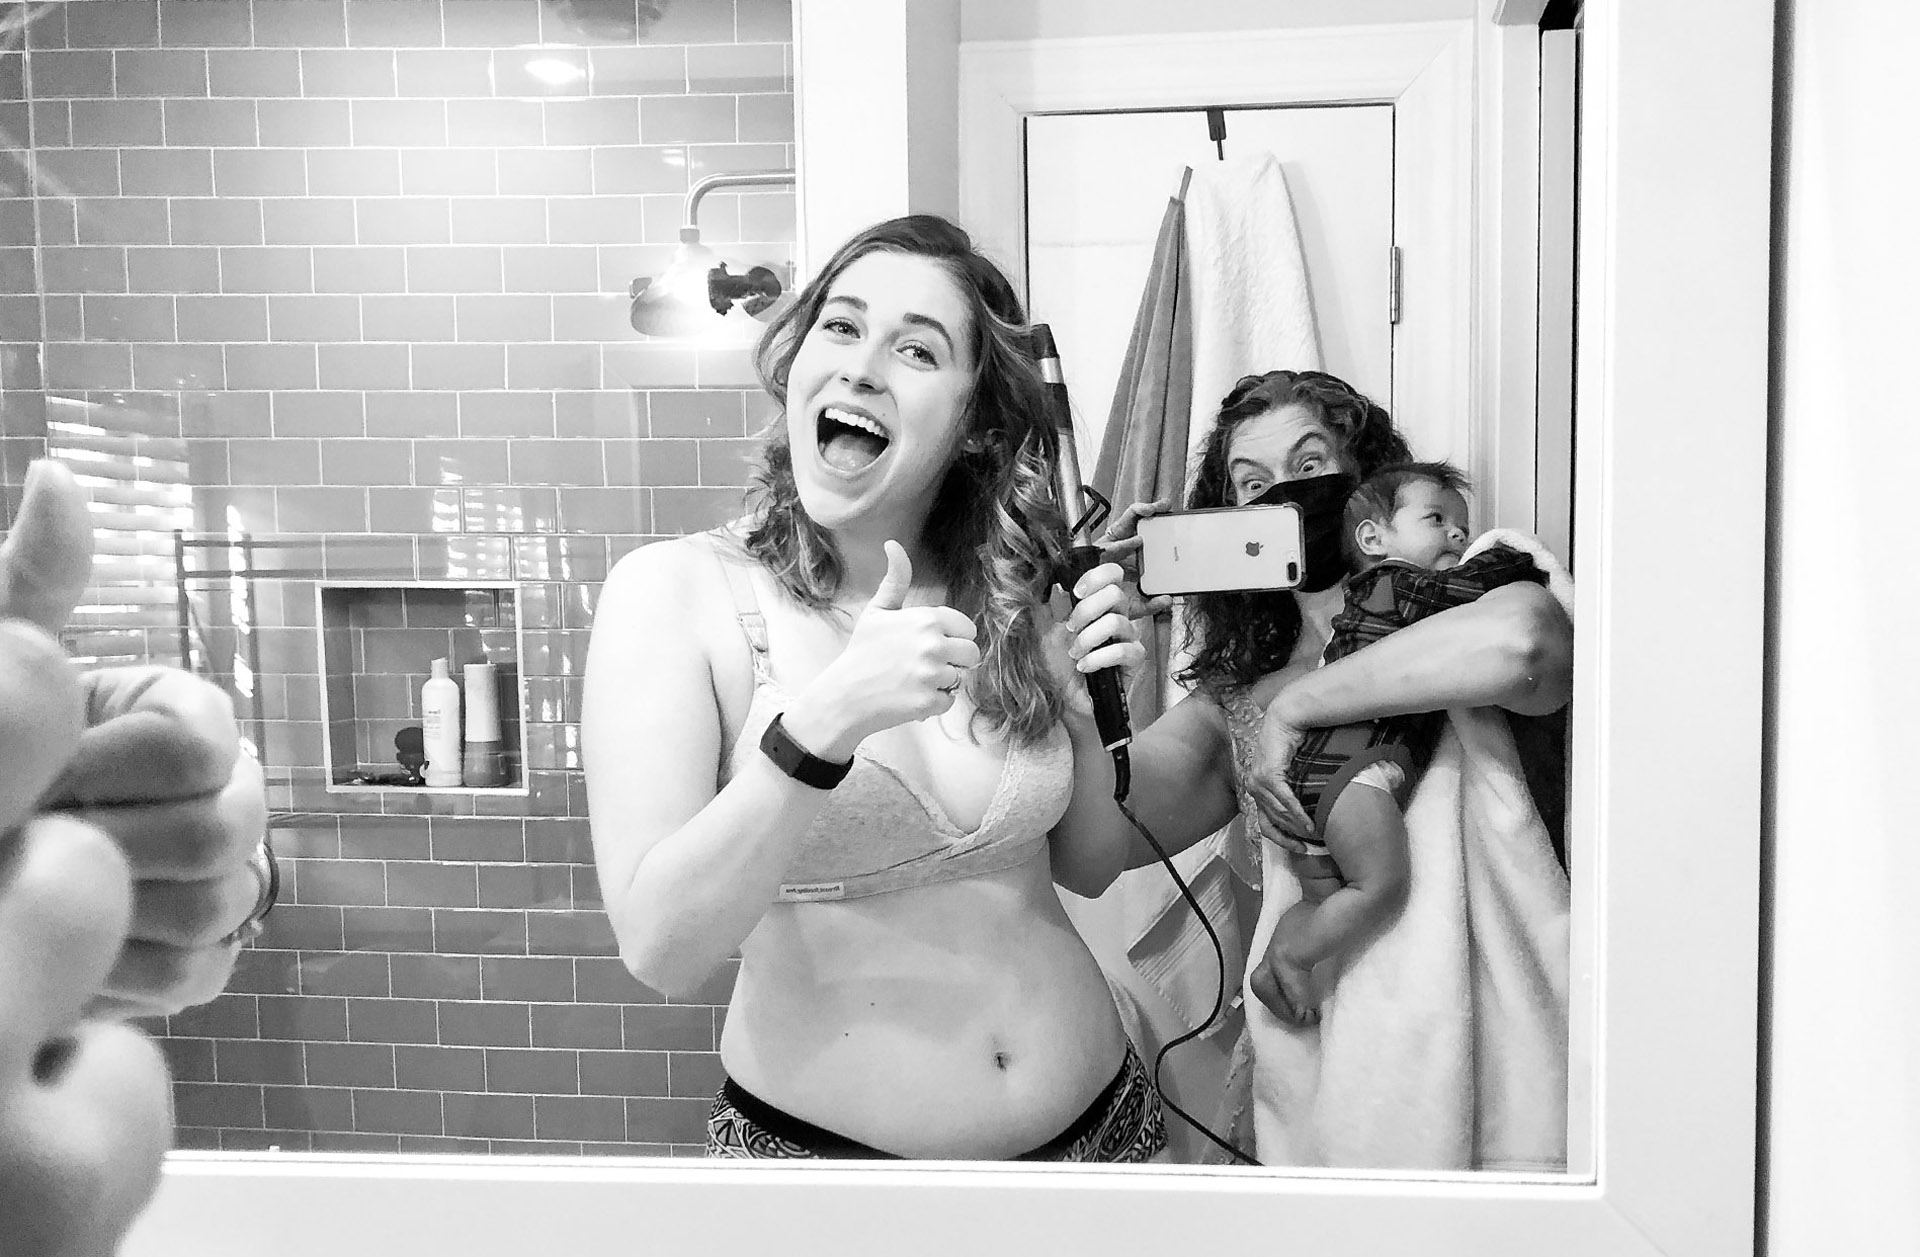 The maid of honor gets ready in the bathroom while the mother of the bride tries to take photos while also babysitting.